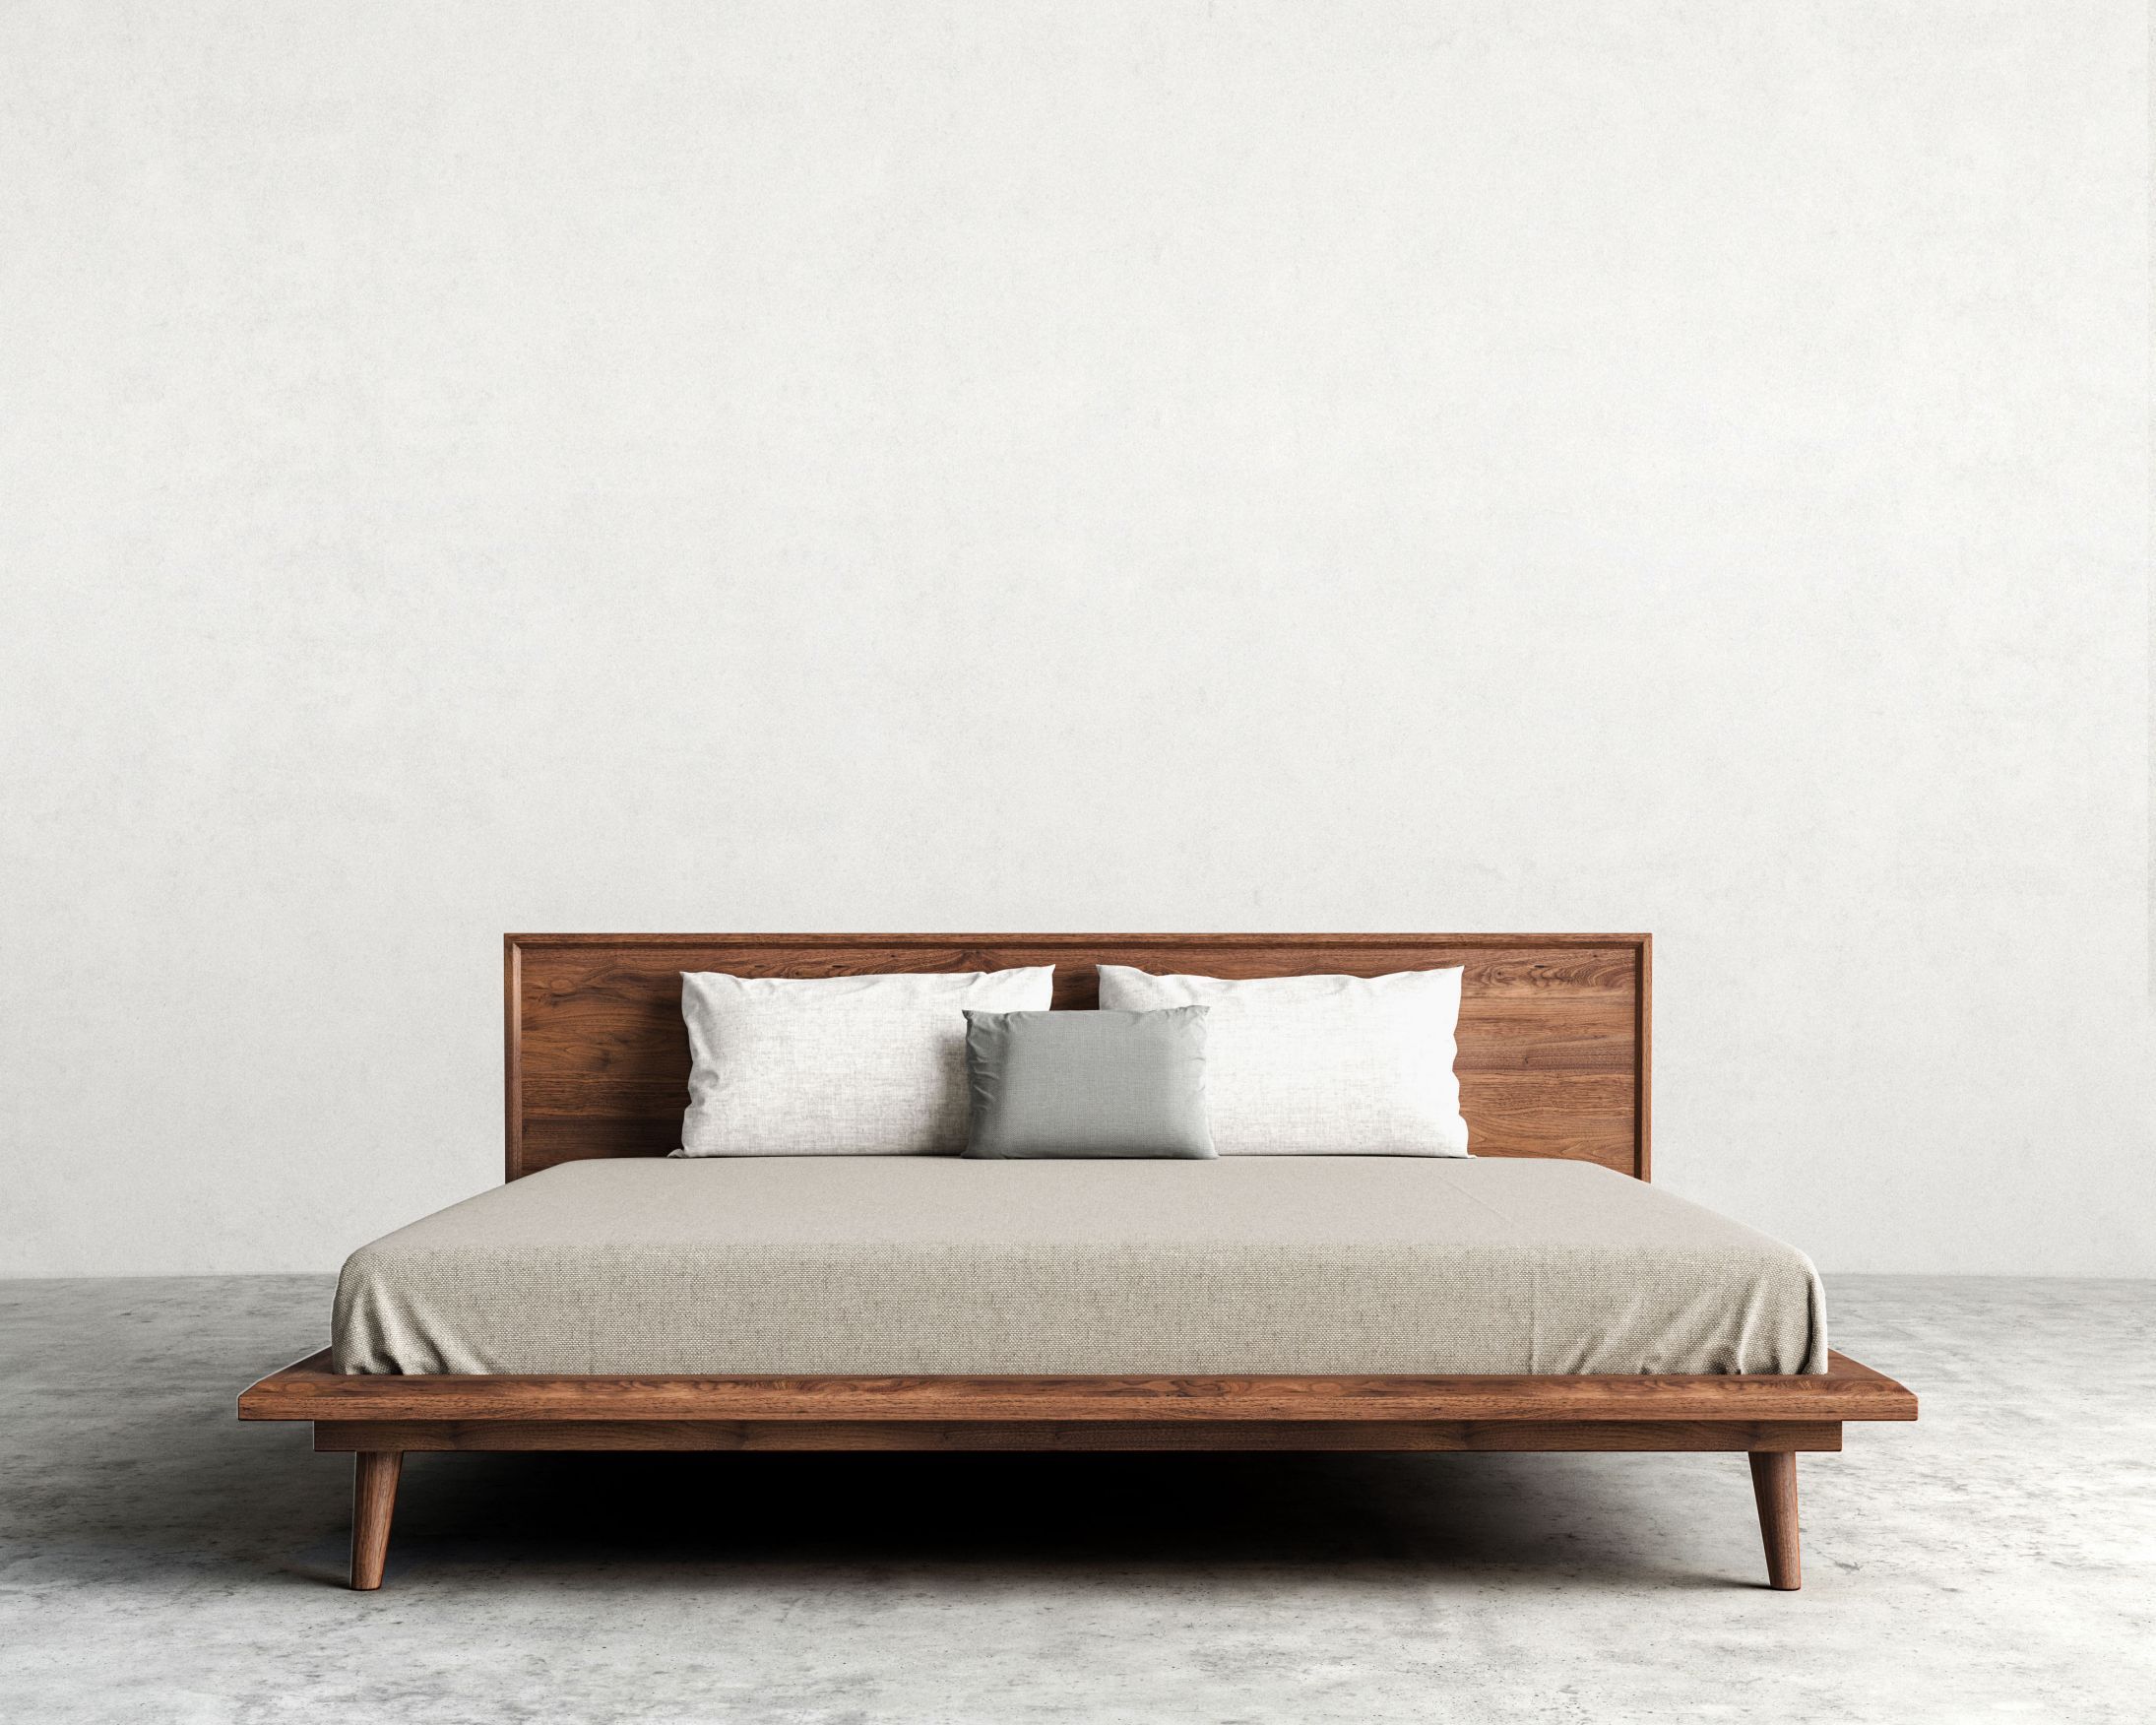 Asher is a mid-century modern inspired bed with tapered legs and beautiful  dark-stained walnut veneer, available in Queen or King.